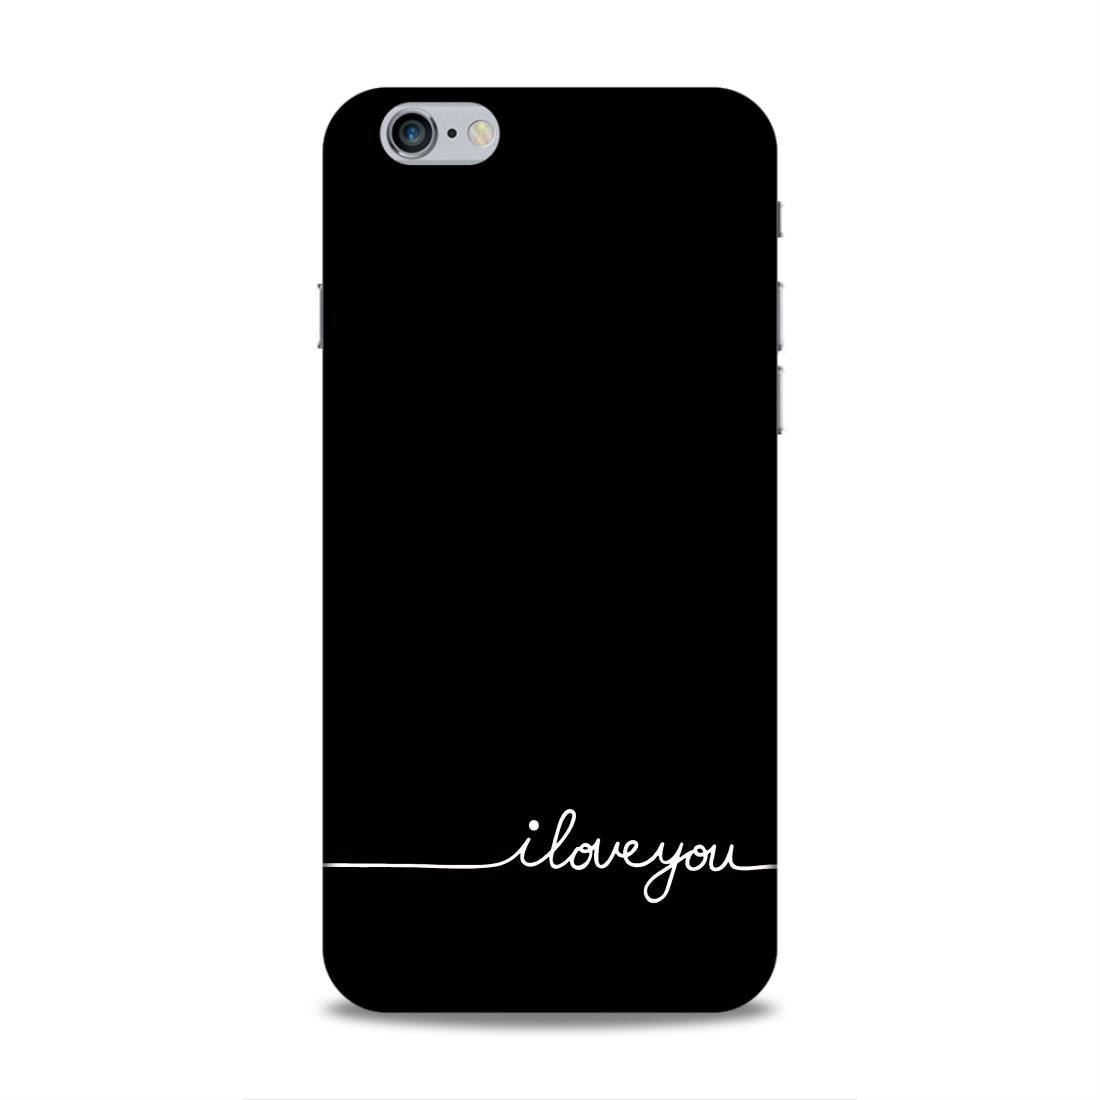 I Love You Hard Back Case For Apple iPhone 6 Plus / 6s Plus